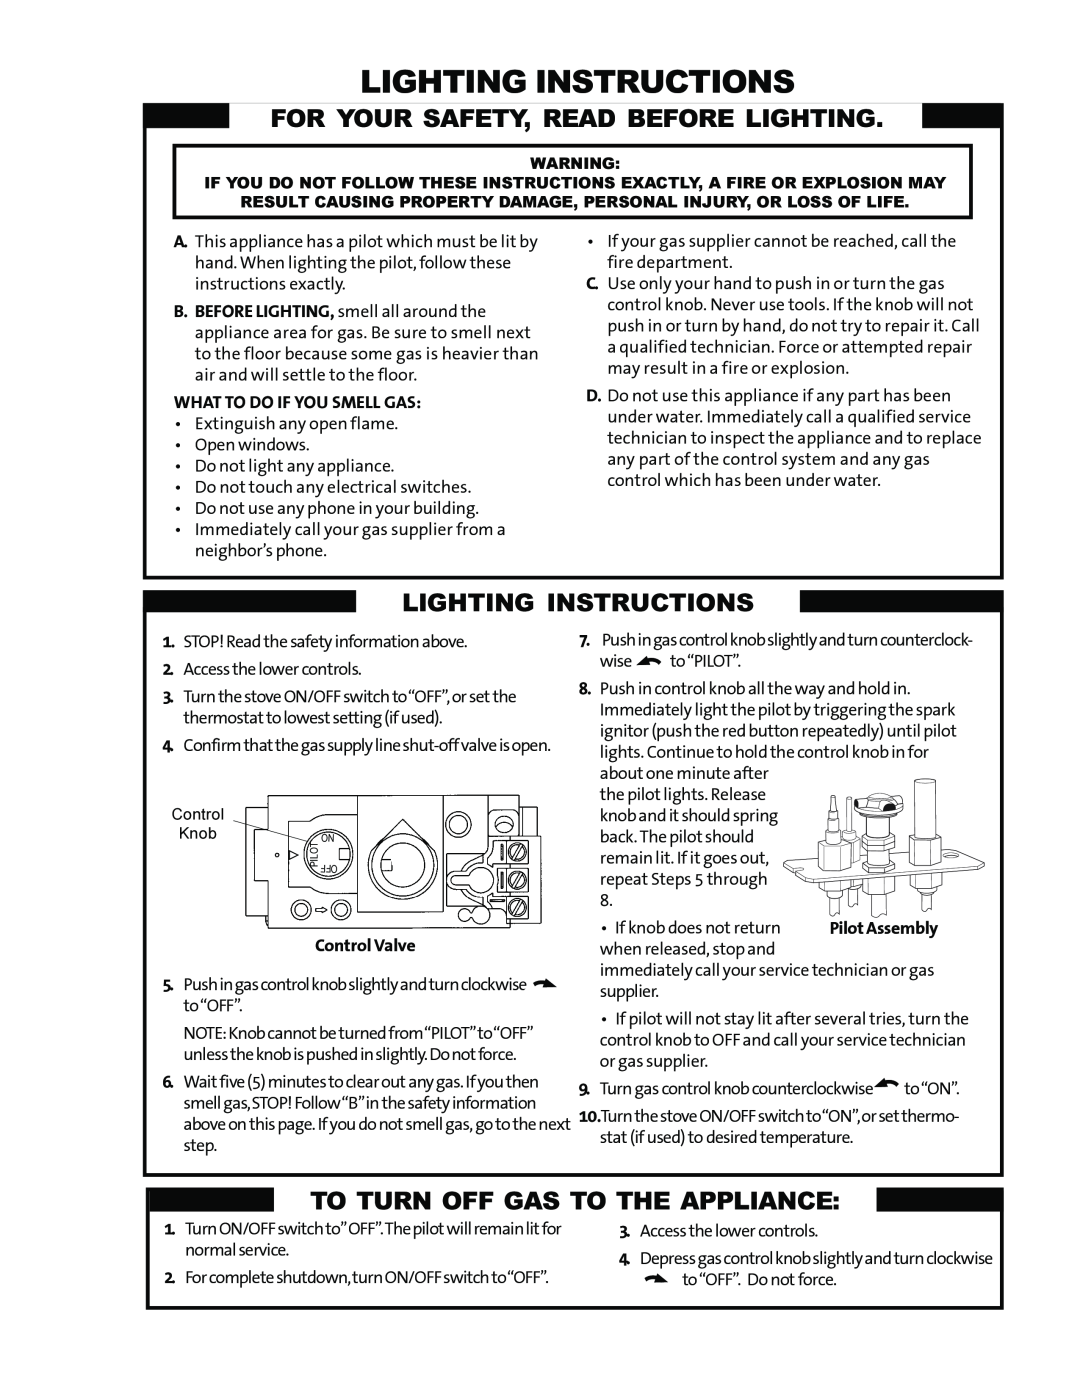 Jotul GF3 DVII manual Lighting Instructions, For Your Safety, Read Before Lighting, To Turn Off Gas To The Appliance 